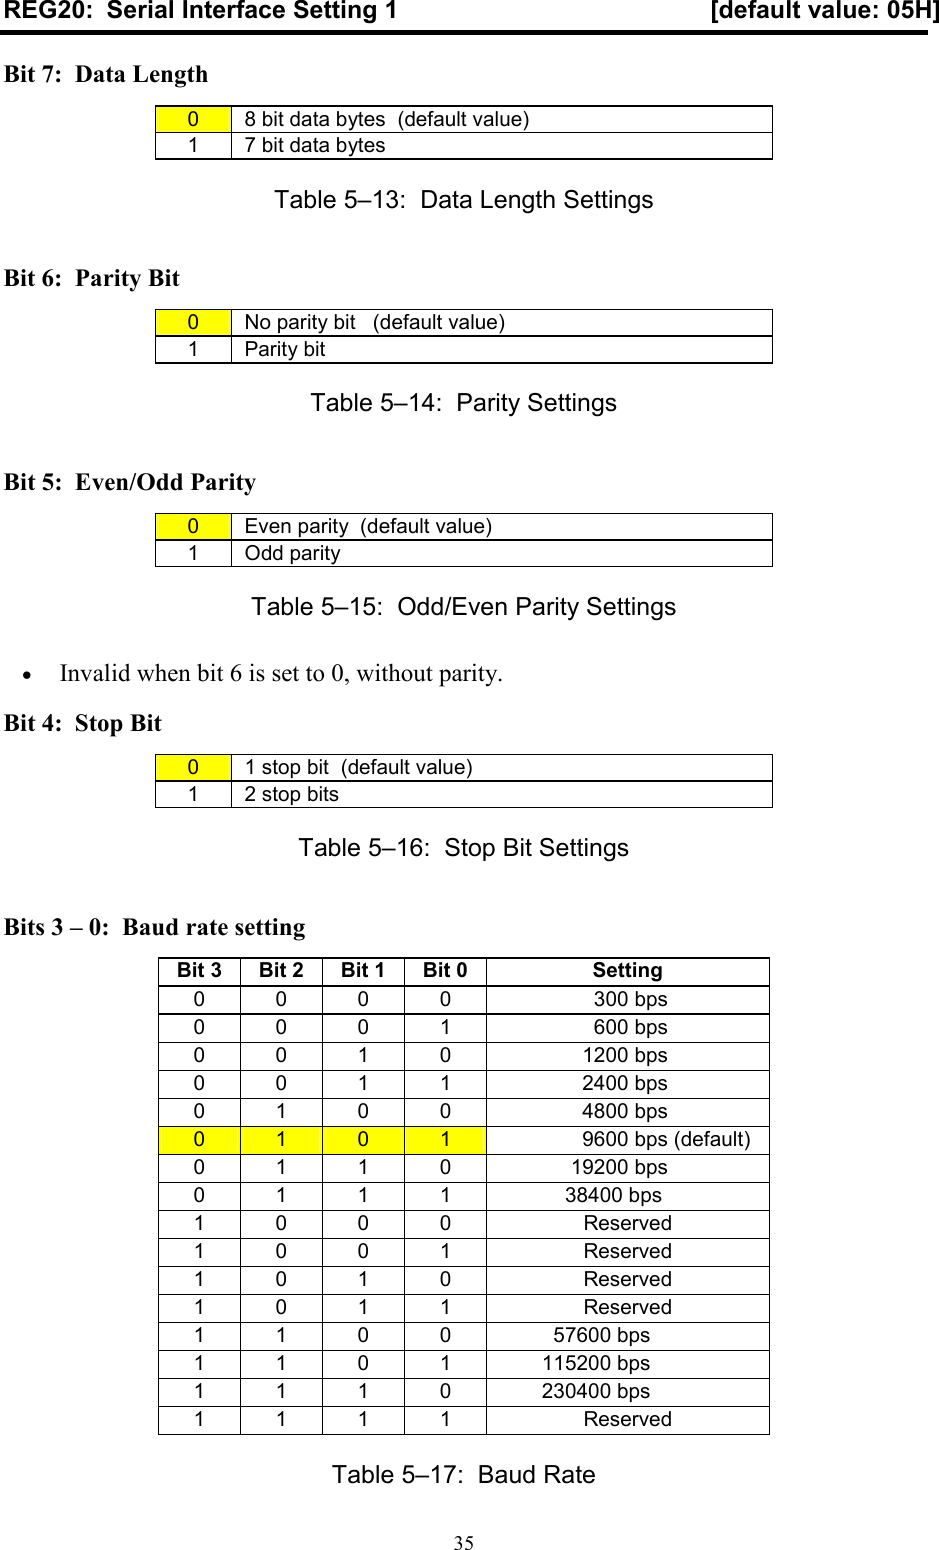  35REG20:  Serial Interface Setting 1  [default value: 05H] Bit 7:  Data Length 0  8 bit data bytes  (default value) 1  7 bit data bytes Table 5–13:  Data Length Settings Bit 6:  Parity Bit 0  No parity bit   (default value) 1  Parity bit Table 5–14:  Parity Settings Bit 5:  Even/Odd Parity 0  Even parity  (default value) 1  Odd parity Table 5–15:  Odd/Even Parity Settings • Invalid when bit 6 is set to 0, without parity. Bit 4:  Stop Bit 0  1 stop bit  (default value) 1  2 stop bits Table 5–16:  Stop Bit Settings Bits 3 – 0:  Baud rate setting Bit 3 Bit 2 Bit 1 Bit 0 Setting 0  0  0  0                    300 bps 0  0  0  1                    600 bps 0  0  1  0                  1200 bps 0  0  1  1                  2400 bps 0  1  0  0                  4800 bps 0  1  0  1                  9600 bps (default) 0  1  1  0                19200 bps 0  1  1  1               38400 bps 1  0  0  0  Reserved 1  0  0  1  Reserved 1  0  1  0  Reserved 1  0  1  1  Reserved 1  1  0  0             57600 bps 1  1  0  1           115200 bps 1  1  1  0           230400 bps 1  1  1  1  Reserved Table 5–17:  Baud Rate 